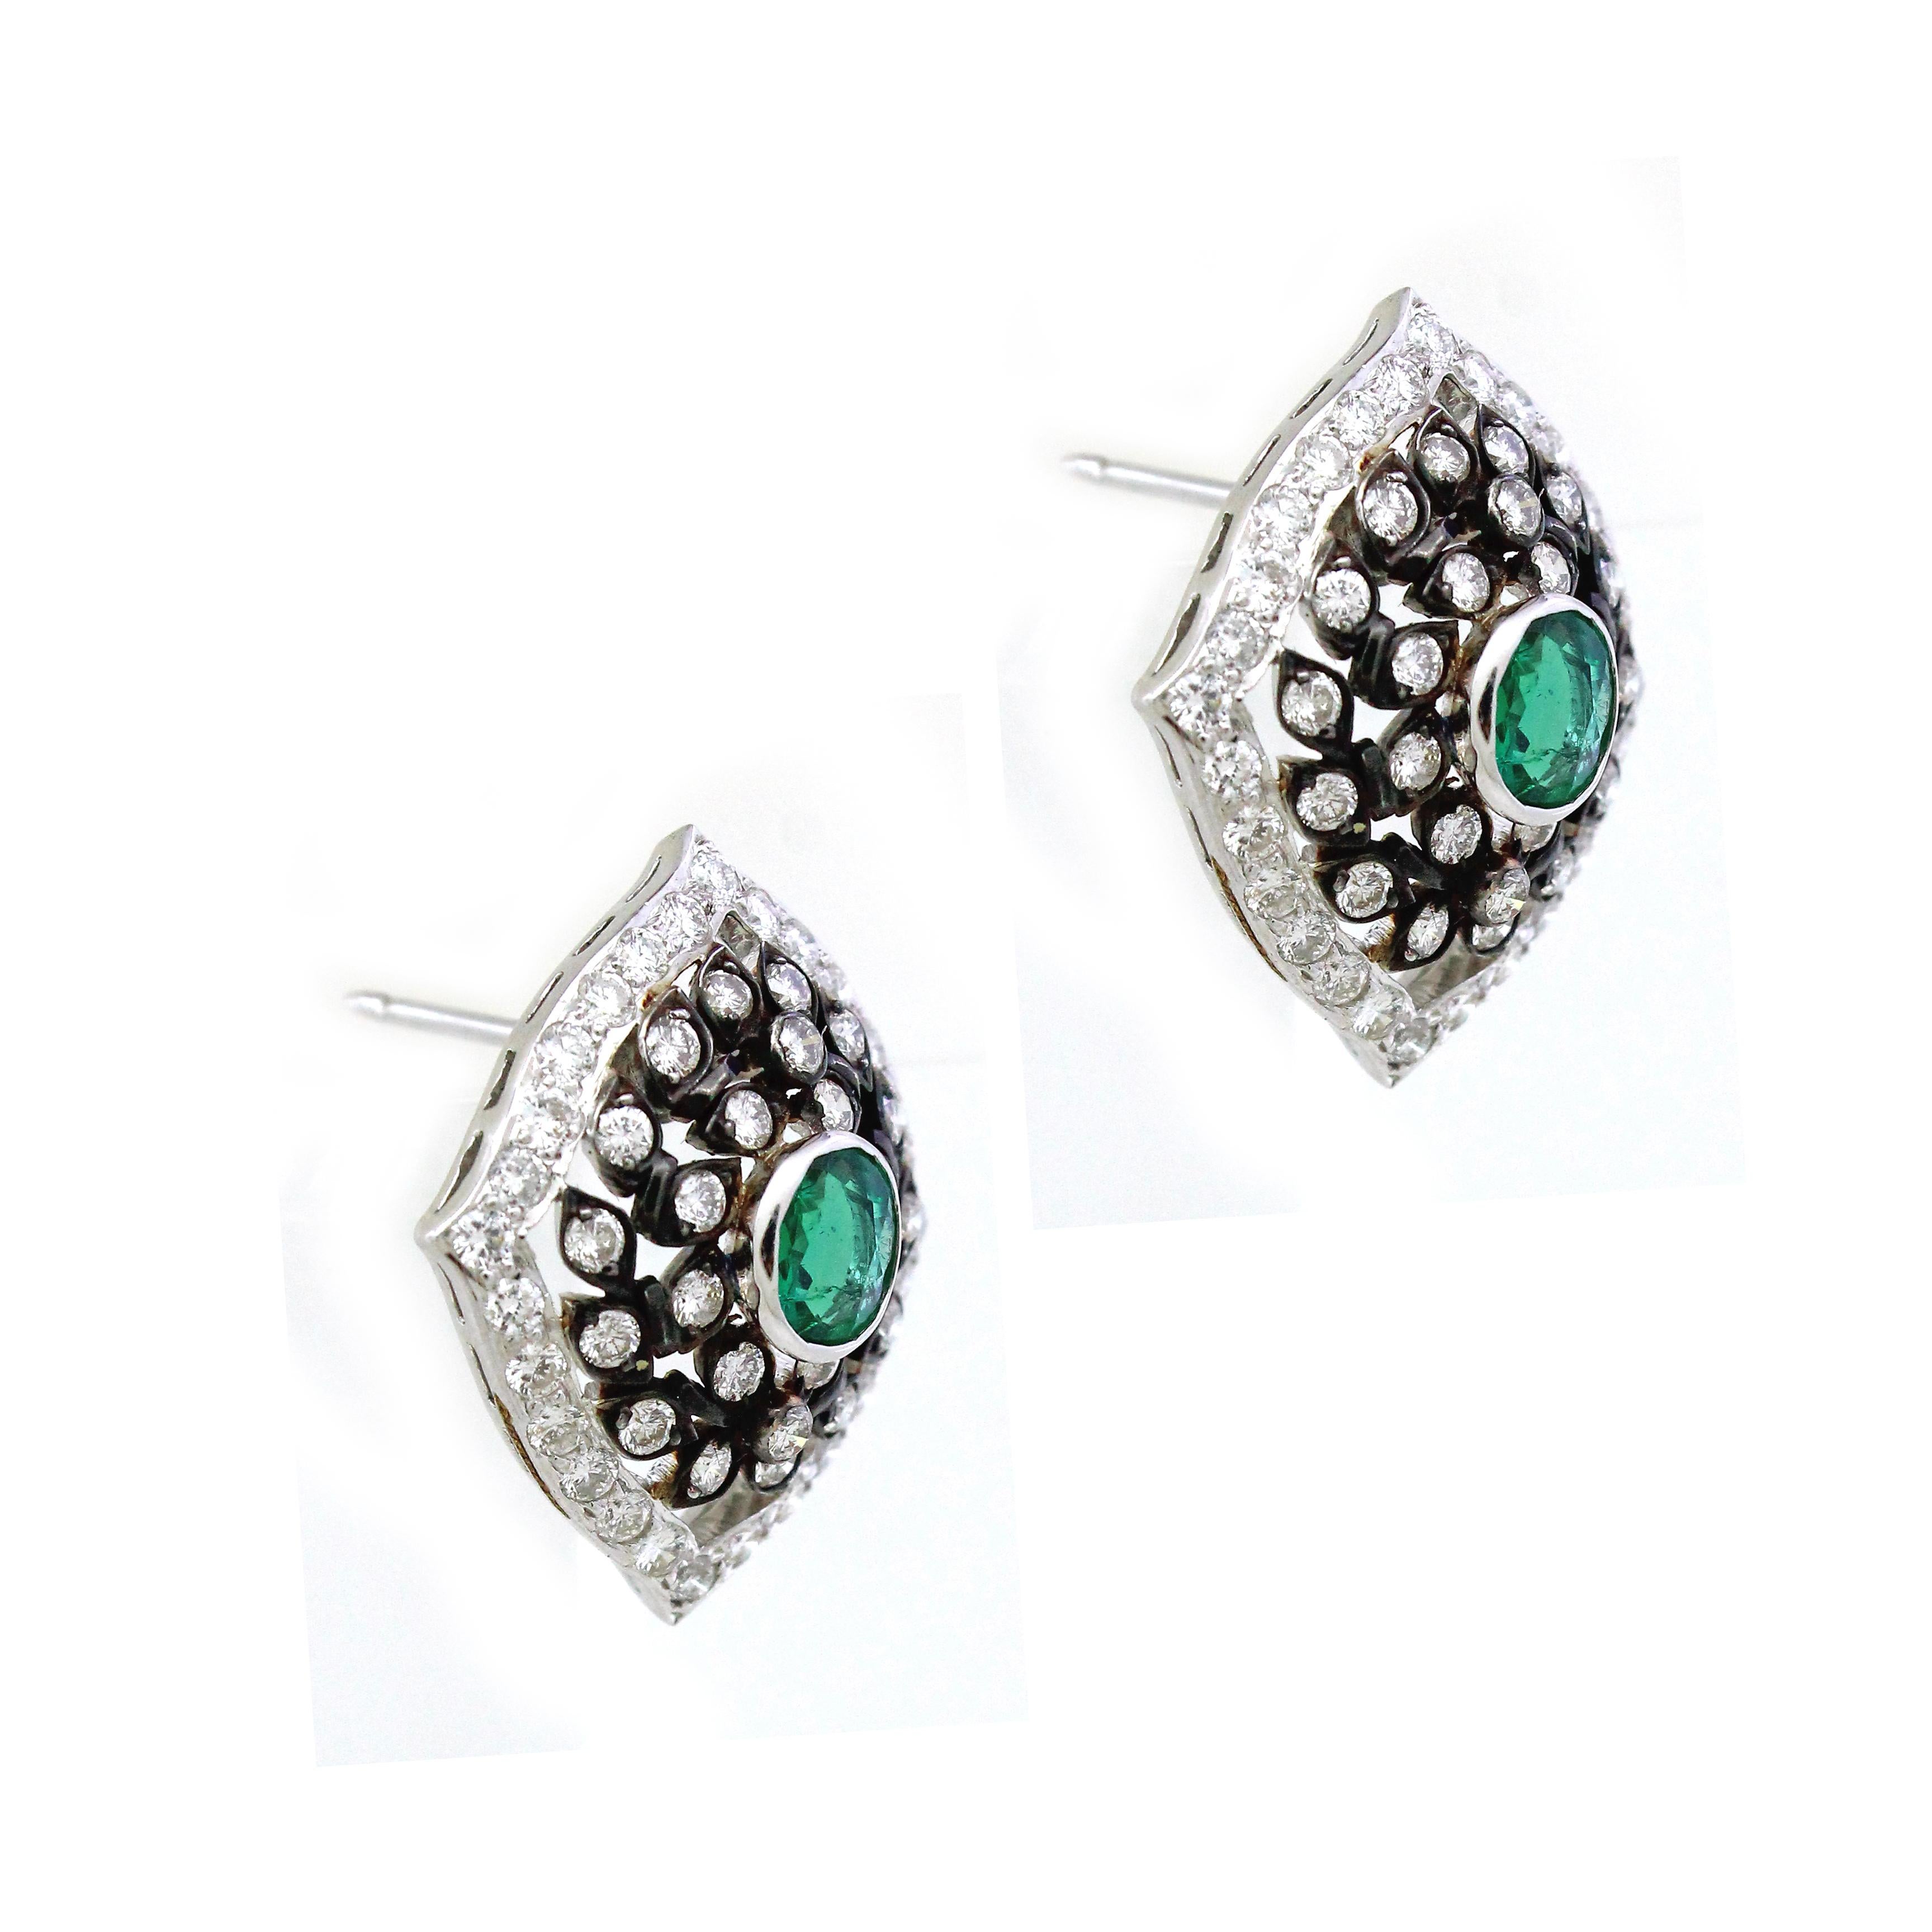 Indulge in the celestial allure of our exquisite pair of earrings, crafted with utmost precision in radiant 18k white gold. Inspired by the enchanting wonders of nature, each earring features two resplendent oval-shaped Emeralds, totaling 0.89